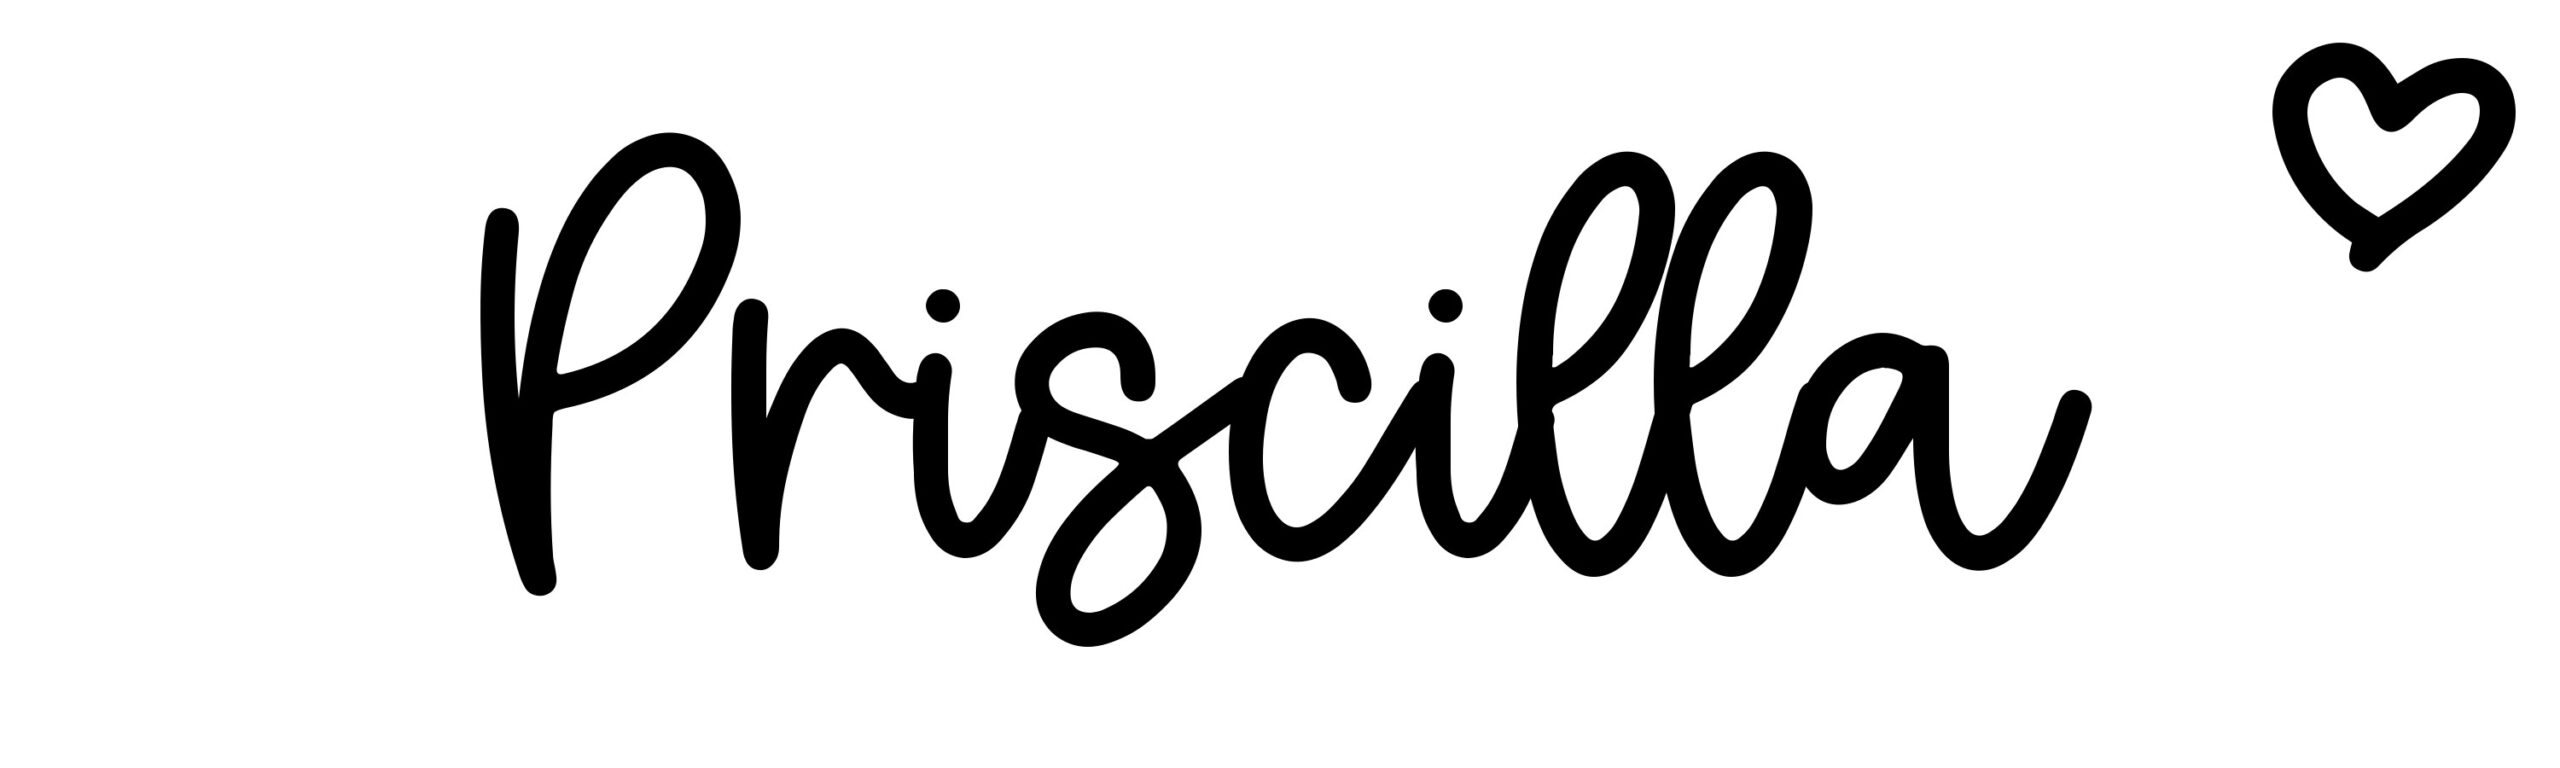 Priscilla - Name meaning, origin, variations and more